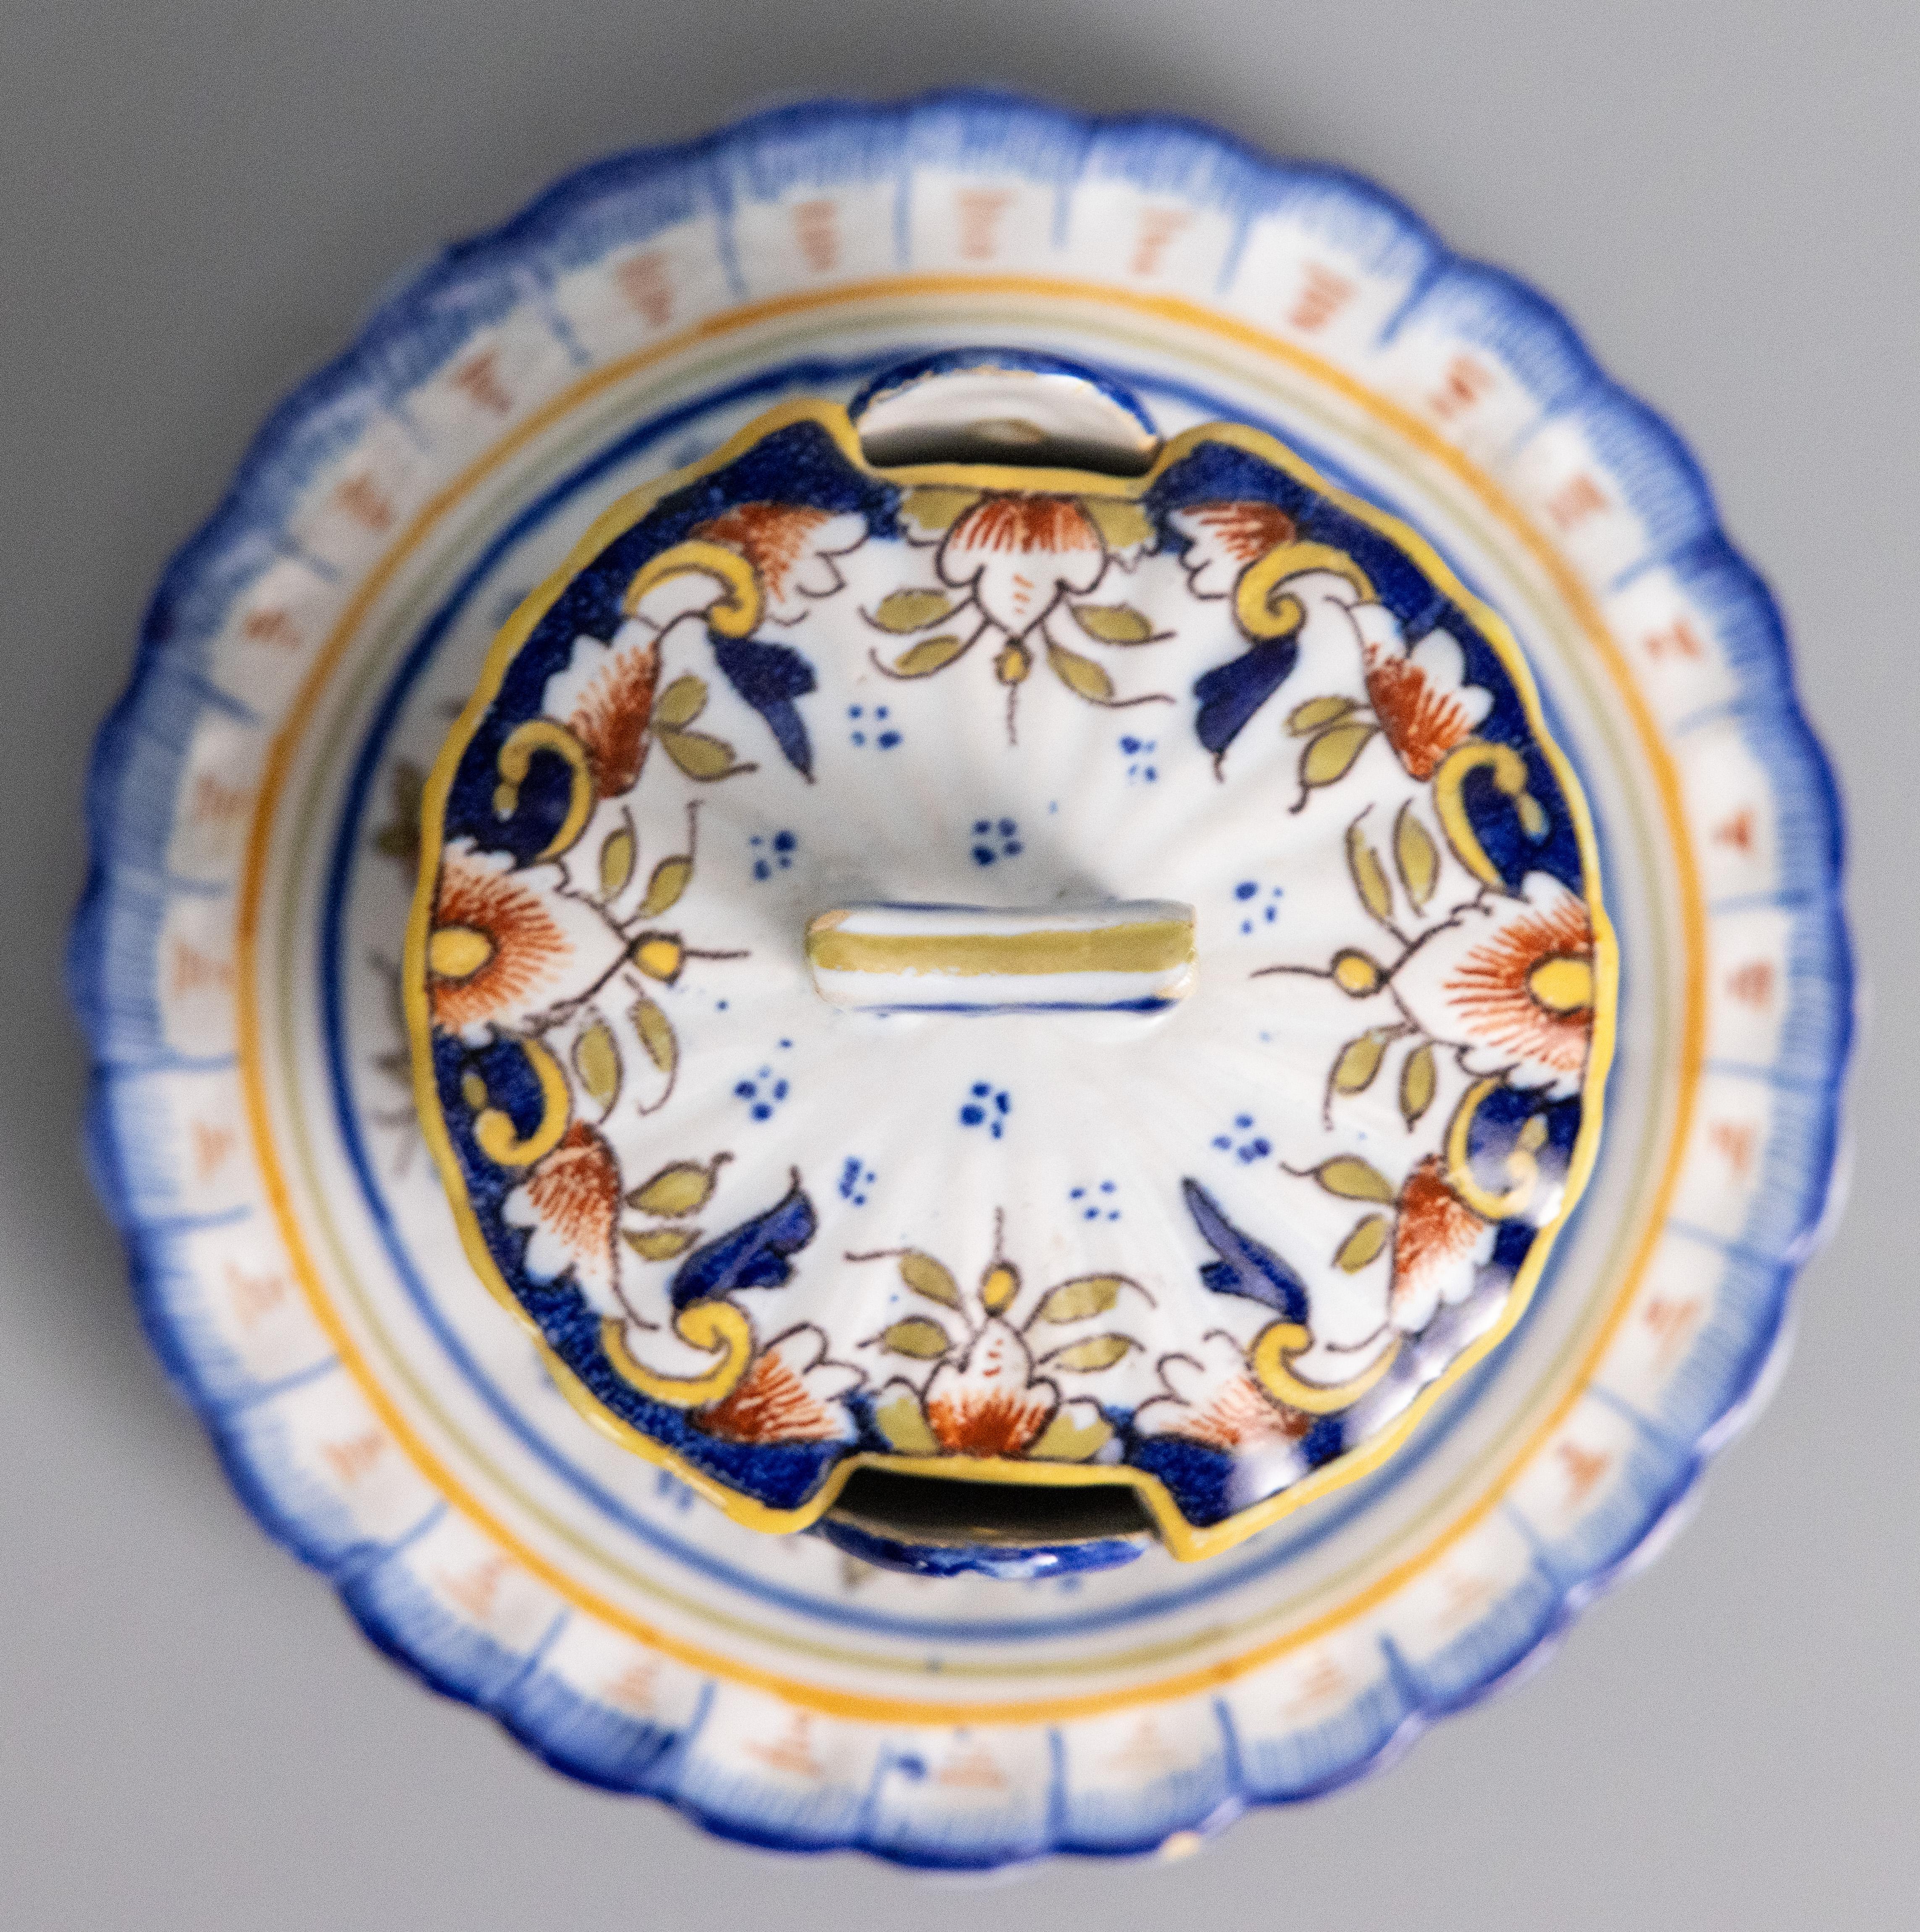 Antique French Faience Desvres Lidded Butter Bowl Dish, circa 1900 For Sale 1